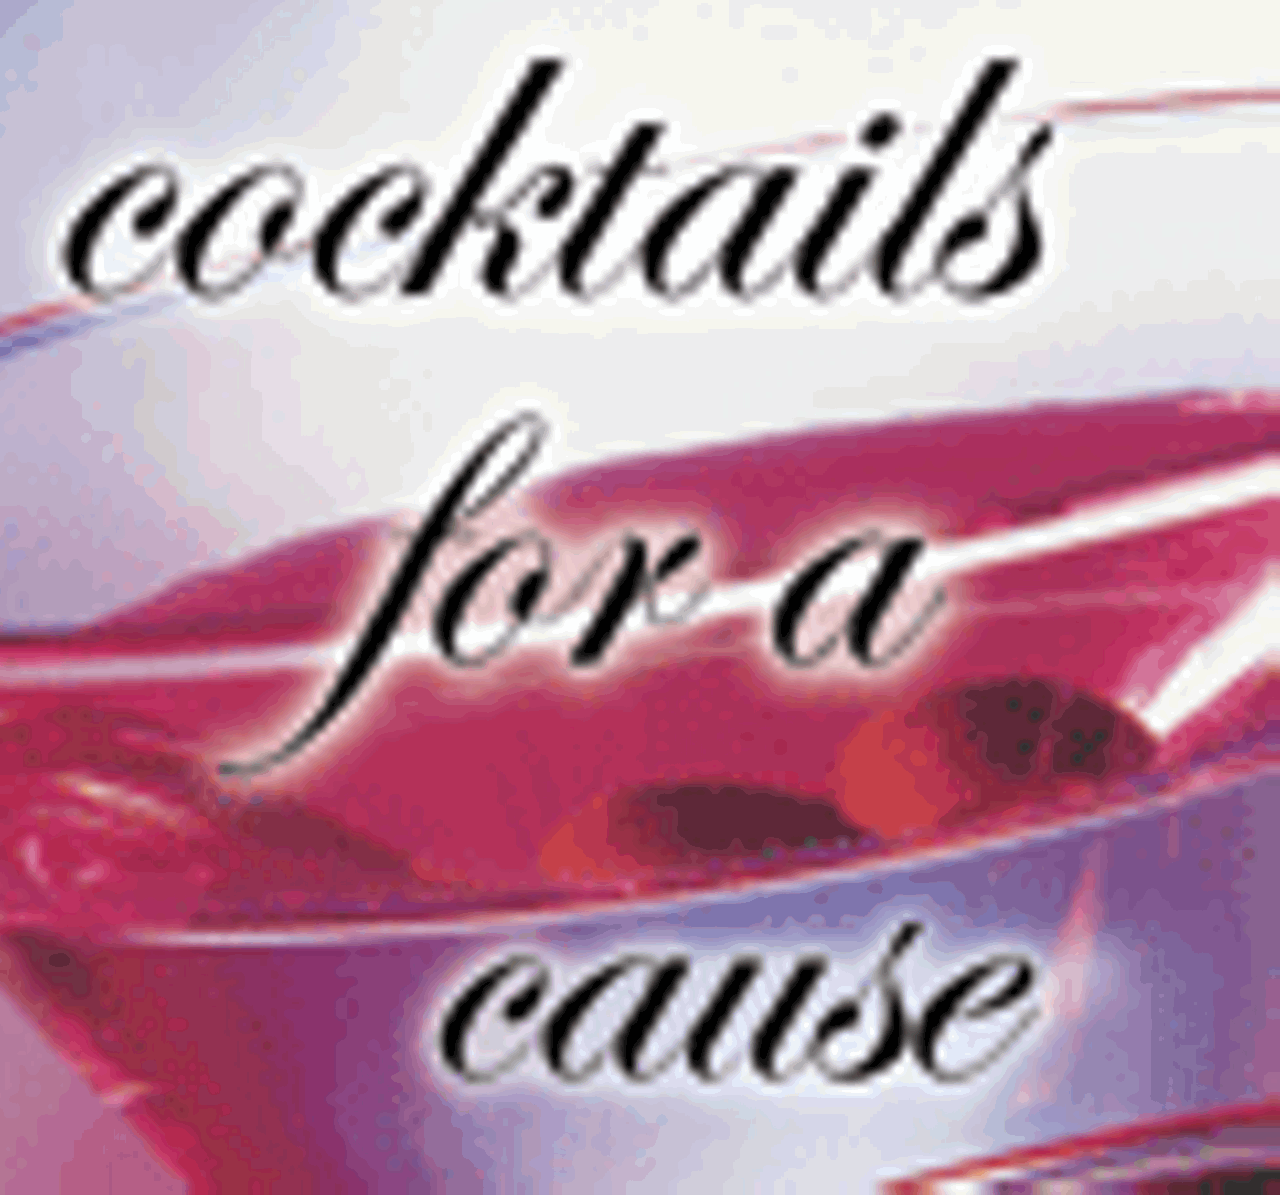 Cocktails for a Cause at Dolce